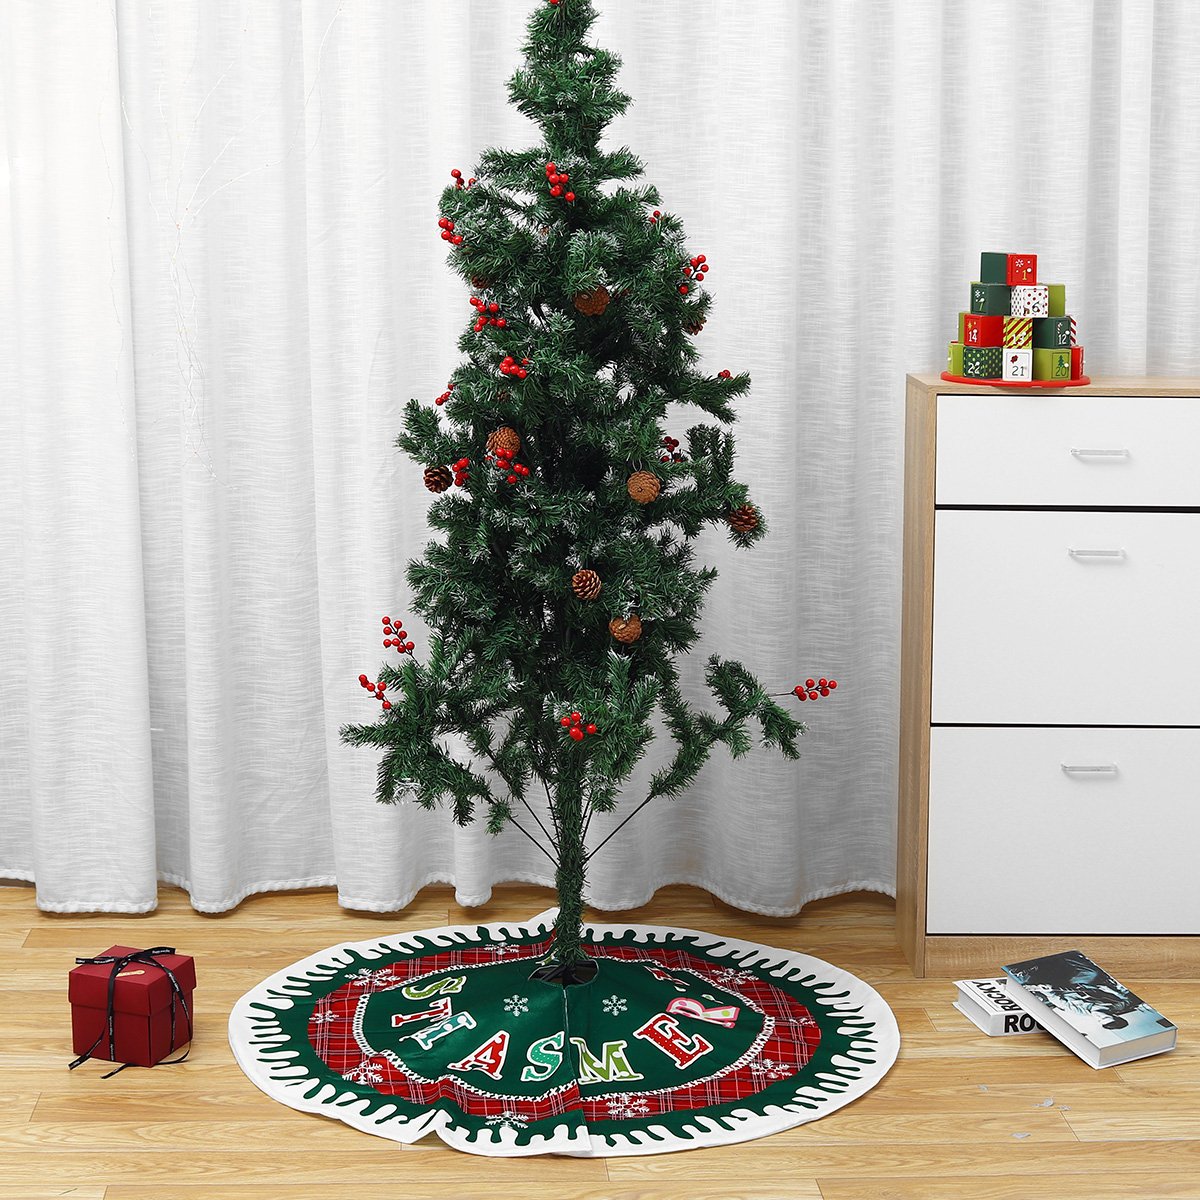 Christmas-Santa-Tree-Mat-Blanket-Carpet-Base-Ornament-Decoration-Apron-Wrap-for-Indoor-Outdoor-Party-1753294-11